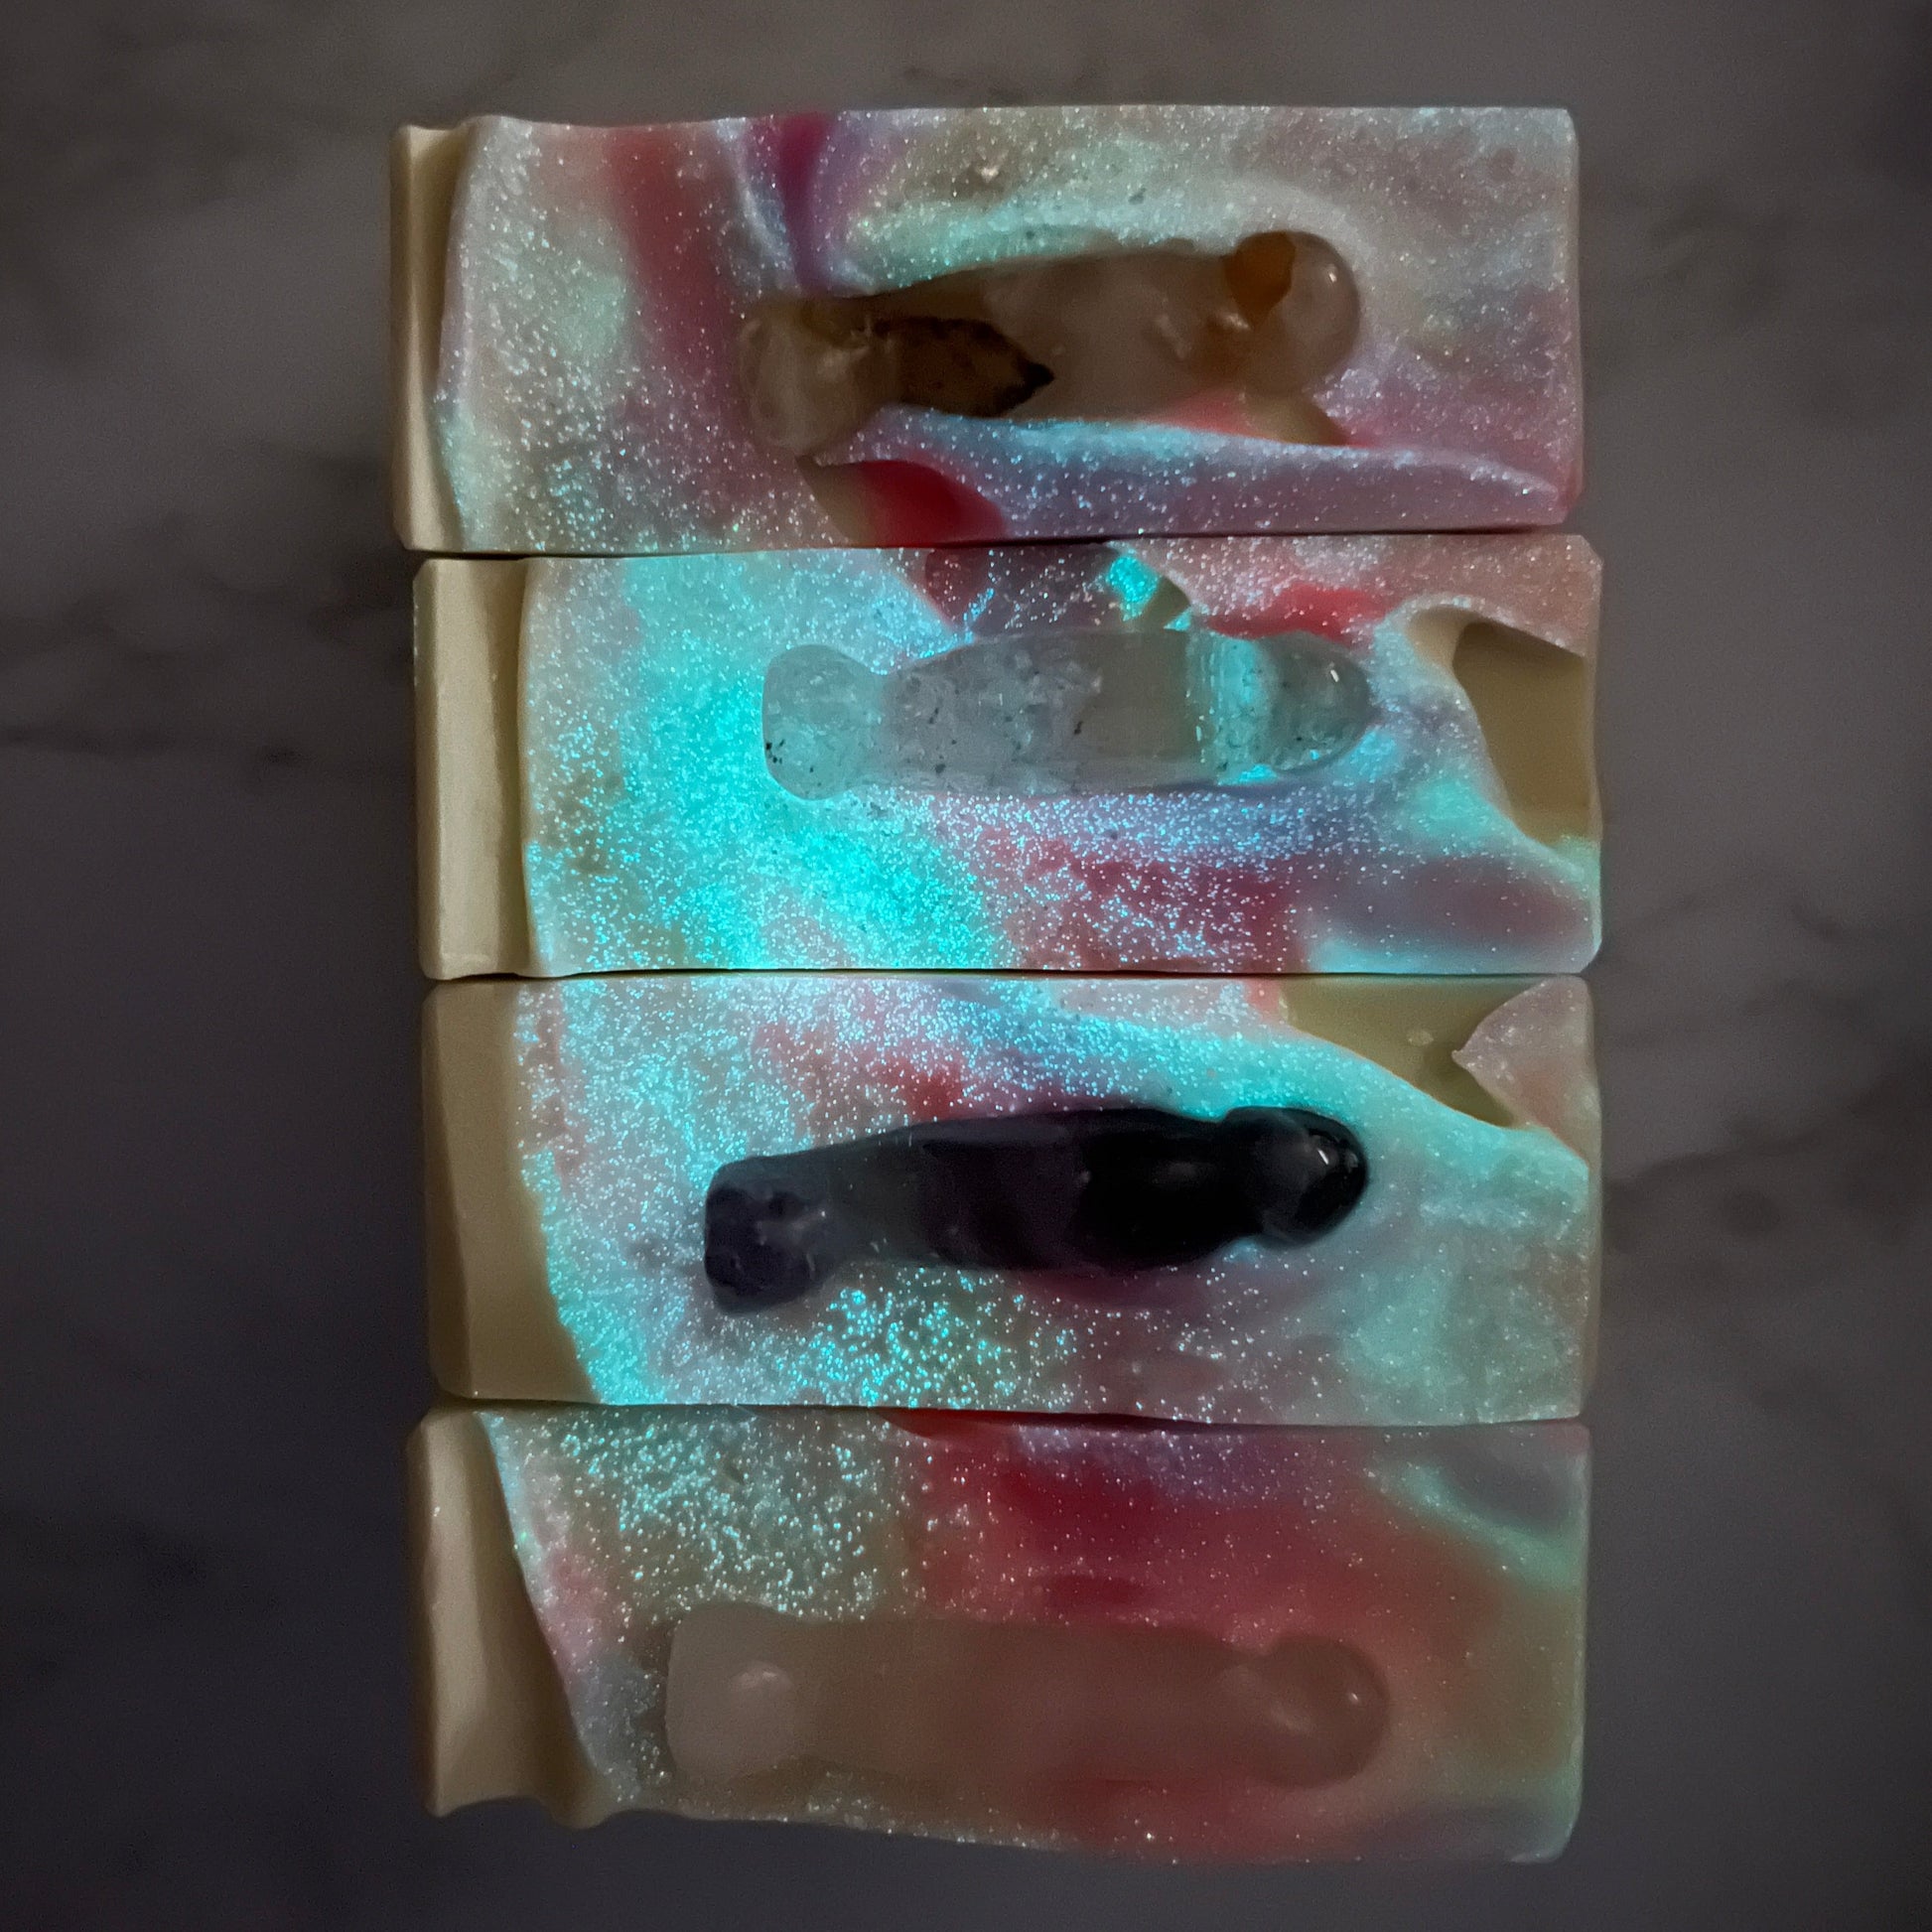 Glow in the dark crystal soap with teeny weenie crystals!